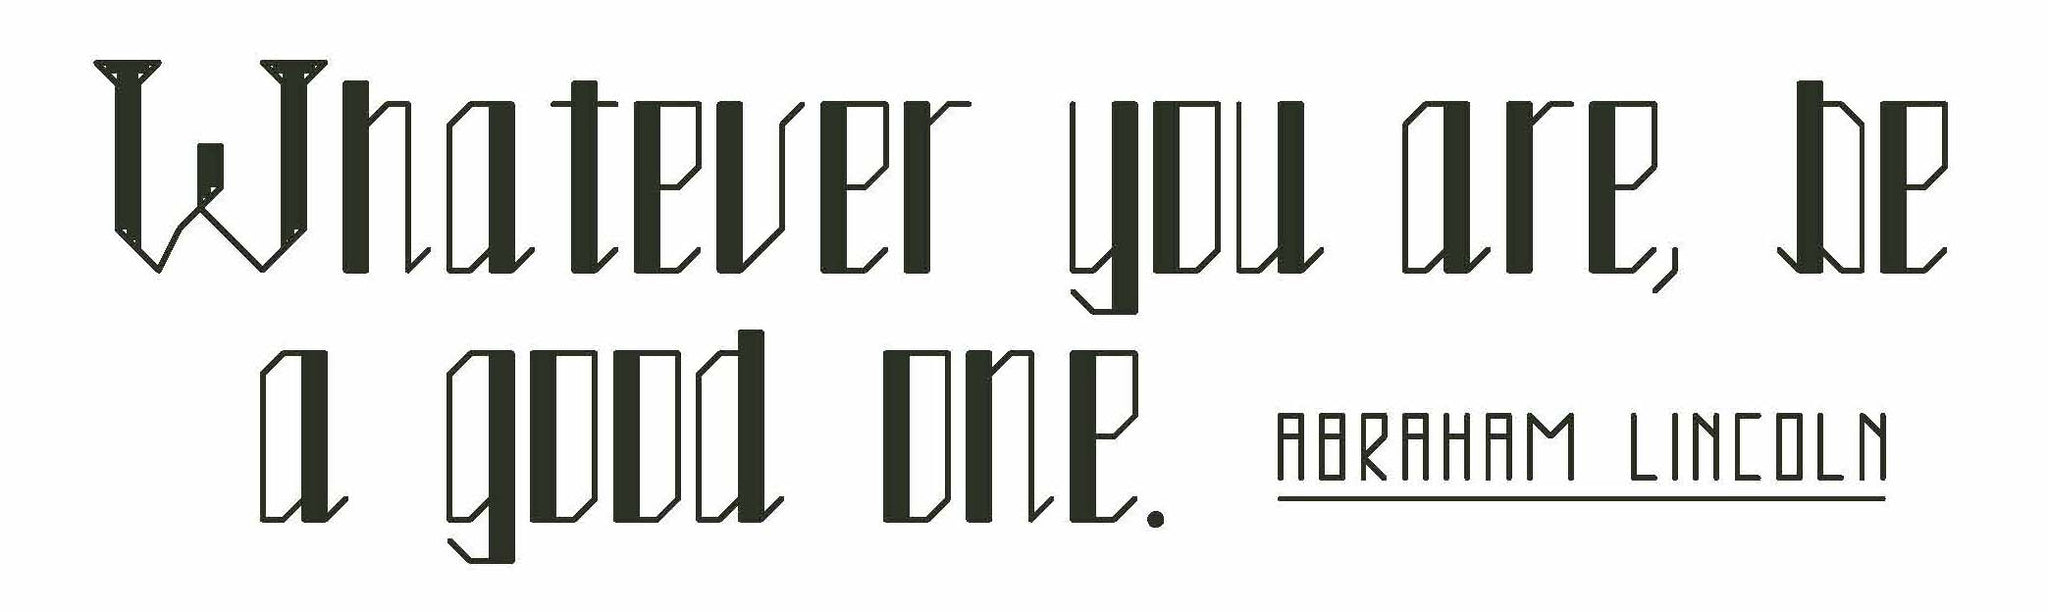 Be a Good One (Lincoln) - Digital Download Phrase Pattern